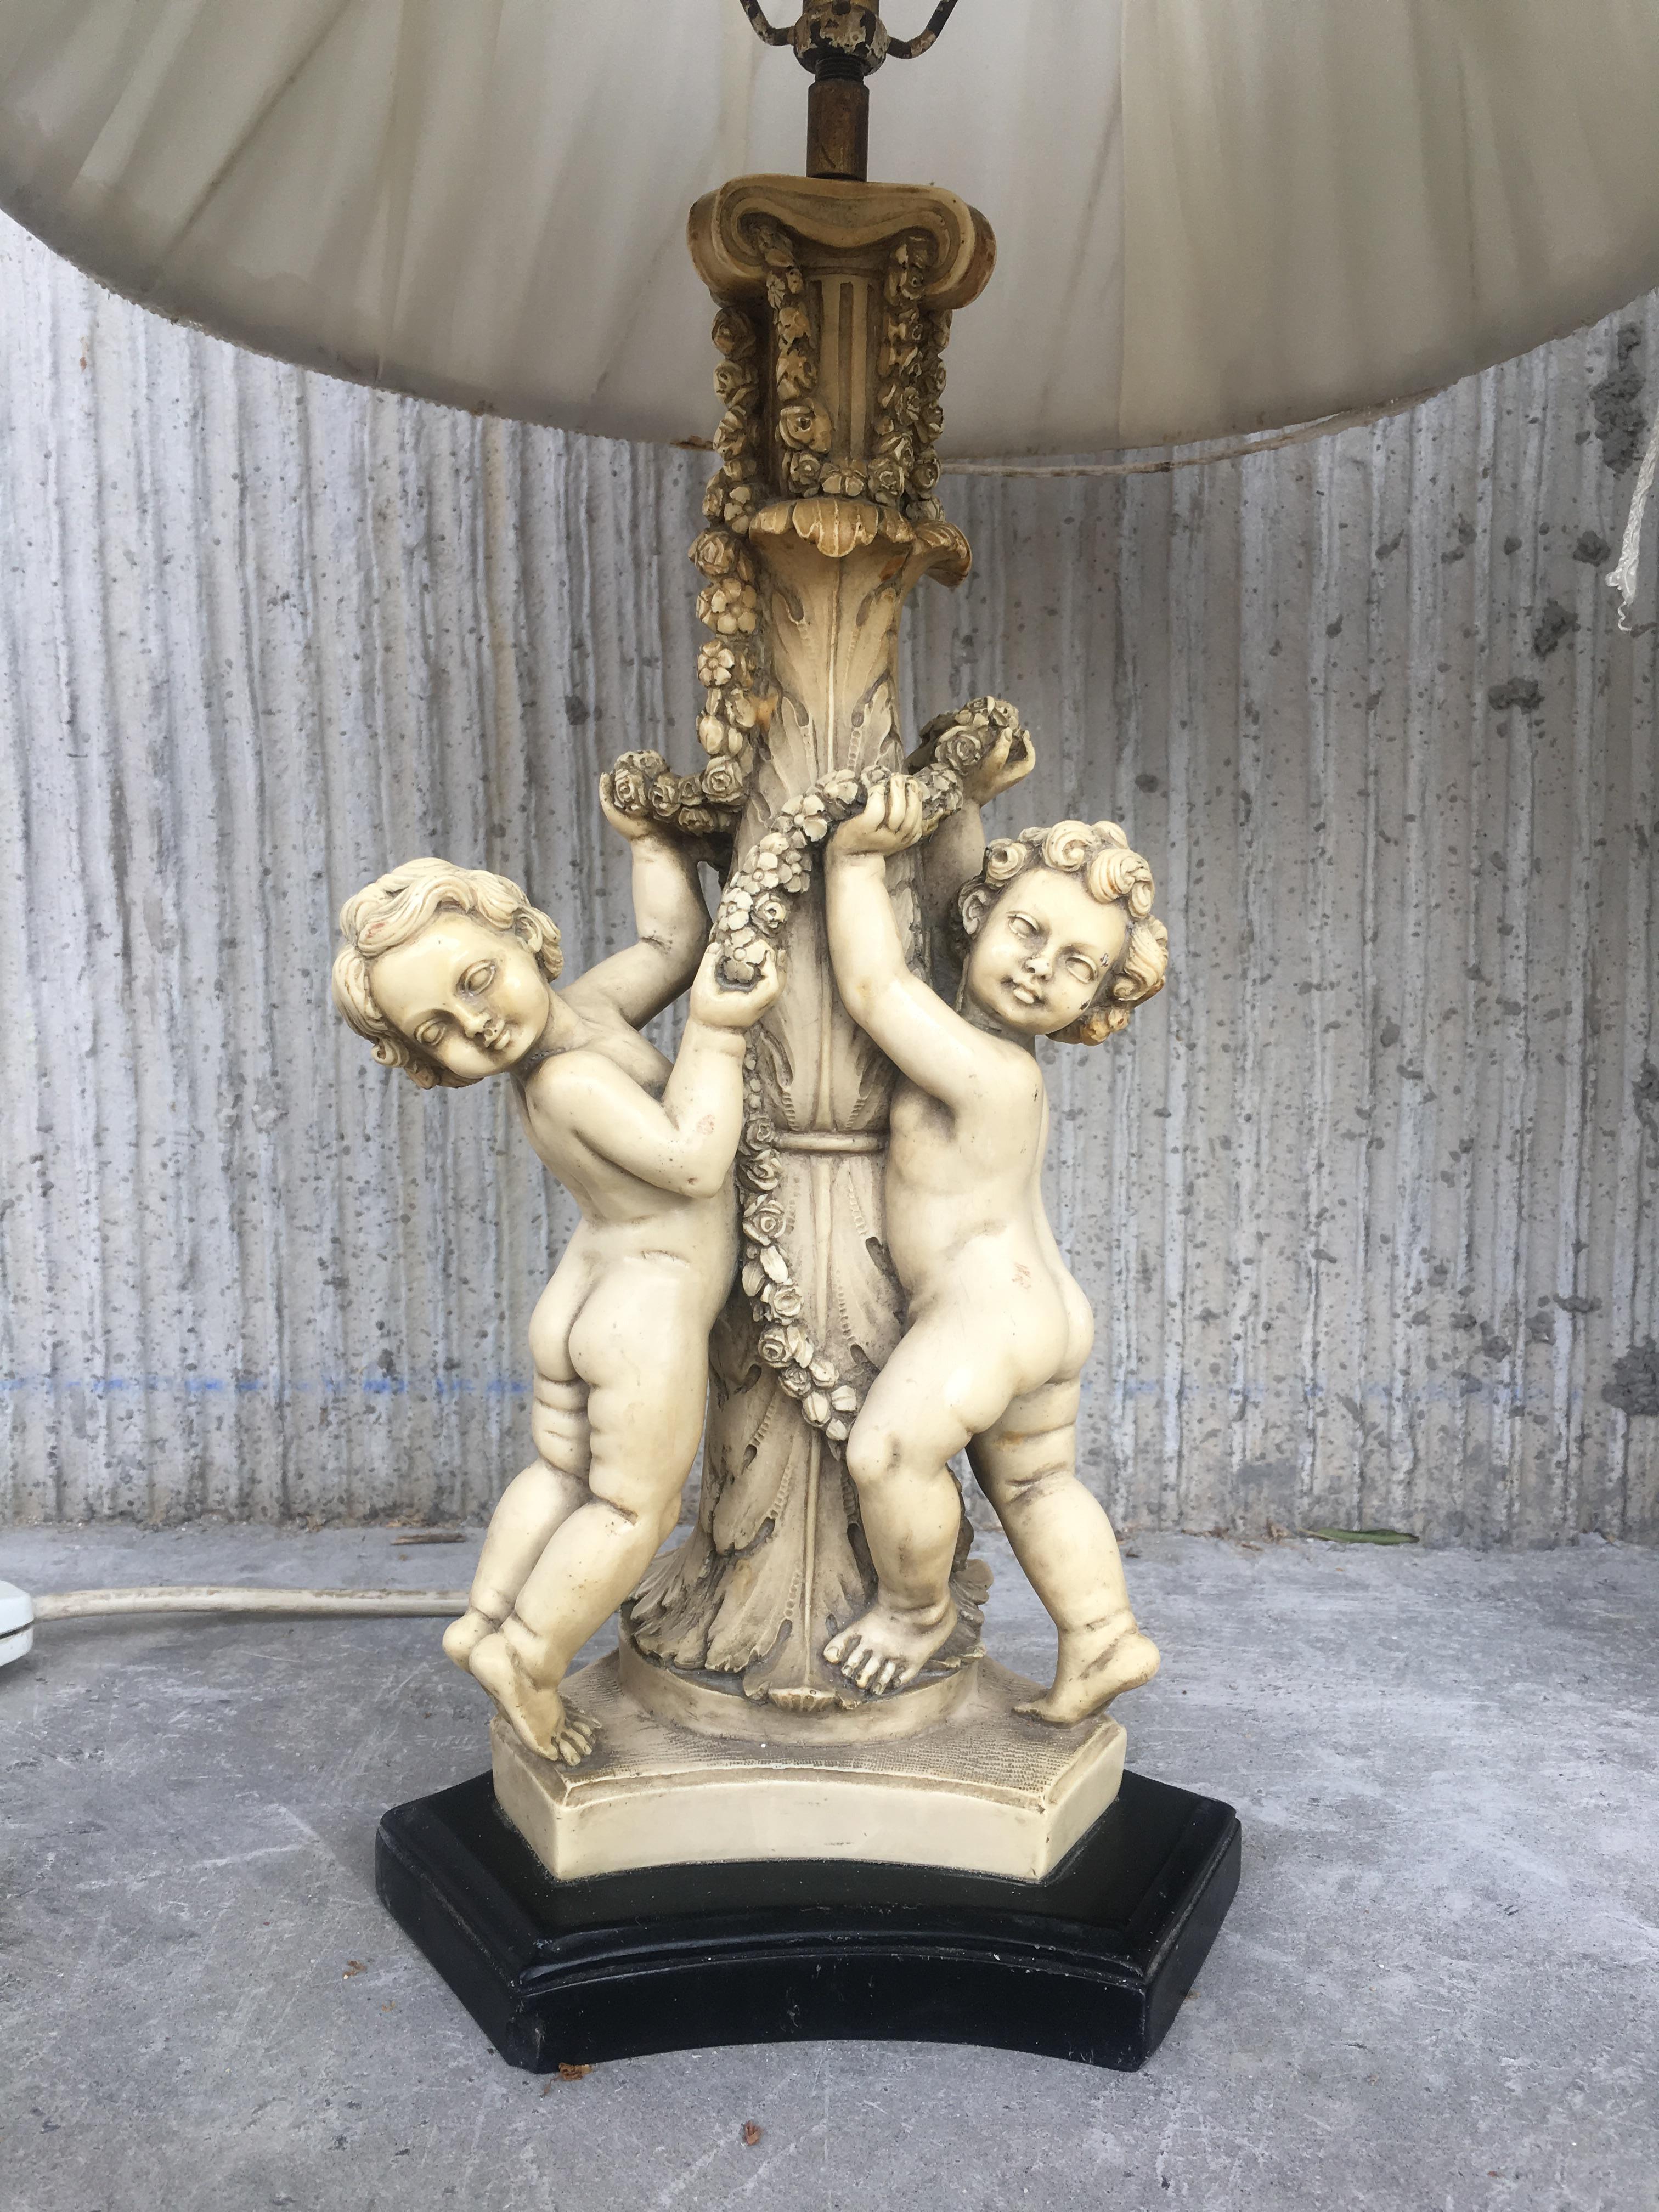 Neoclassical 20th Century Pair of White Resin Cherub Lamps on Wooden Bases by G. Ruggeri